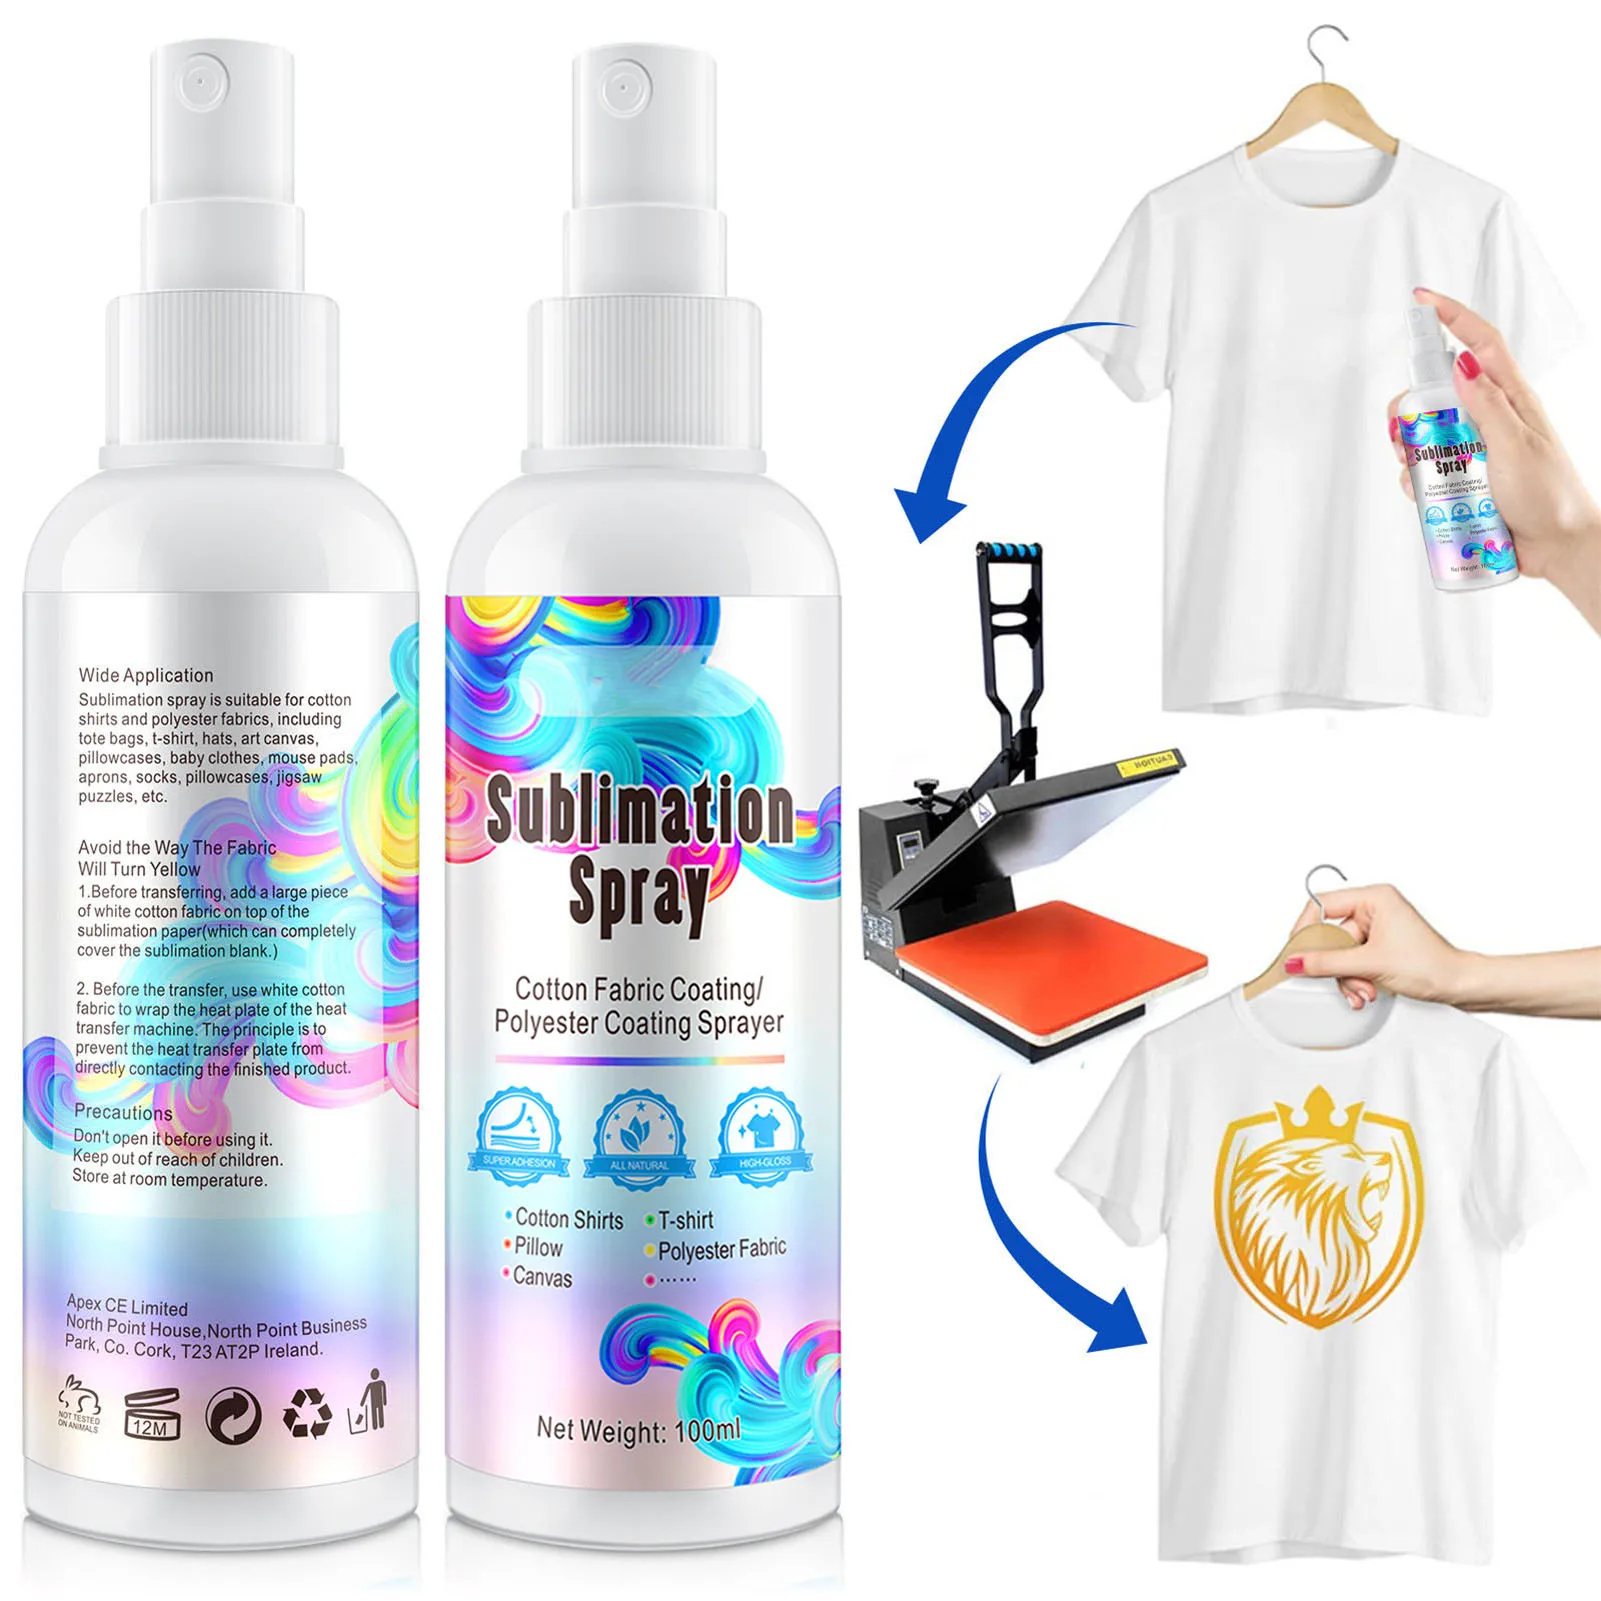 Sublimation Spray, Sublimation Spray for Cotton Shirts, Sublimation Coating  Spray Apply All Fabric, Sublimation Spray for Cotton Quick Dry & Super